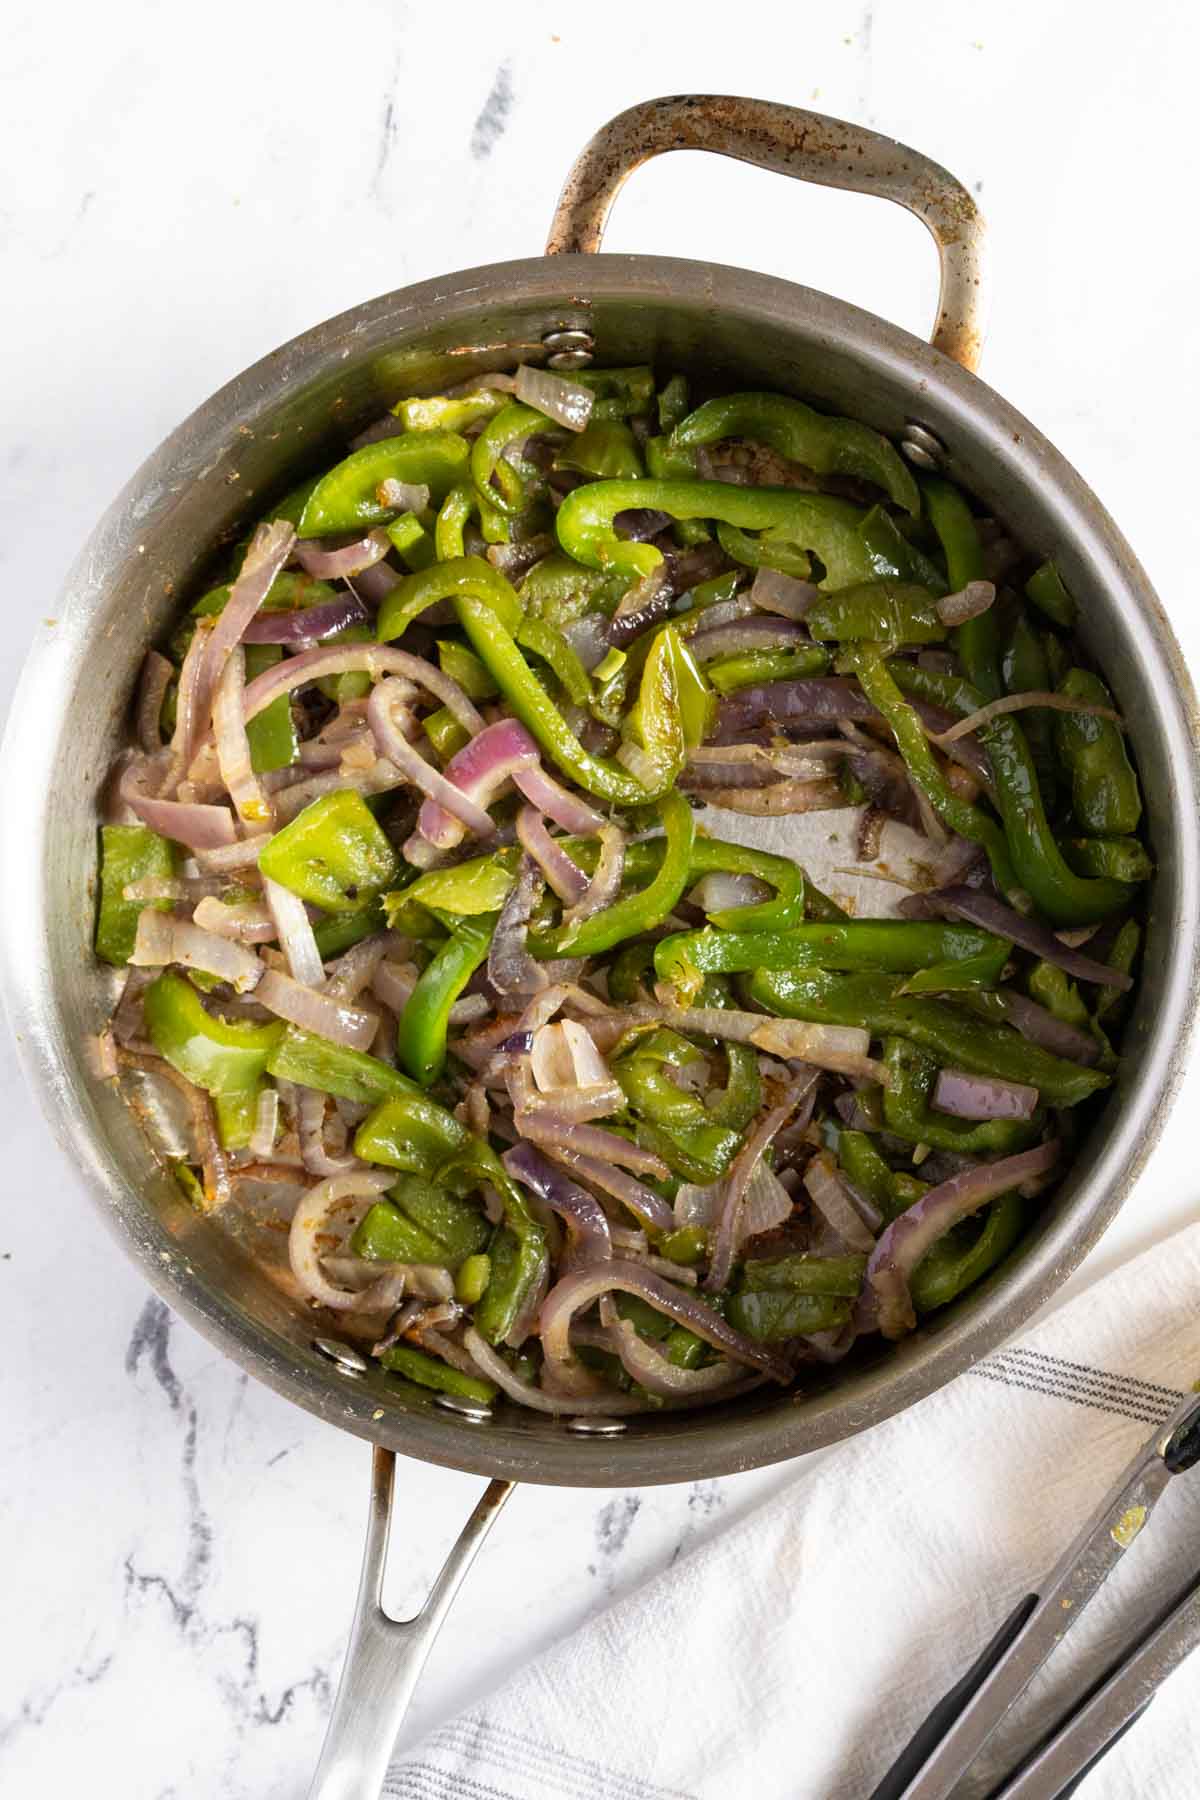 Sauteed pepper and onions in a pan.